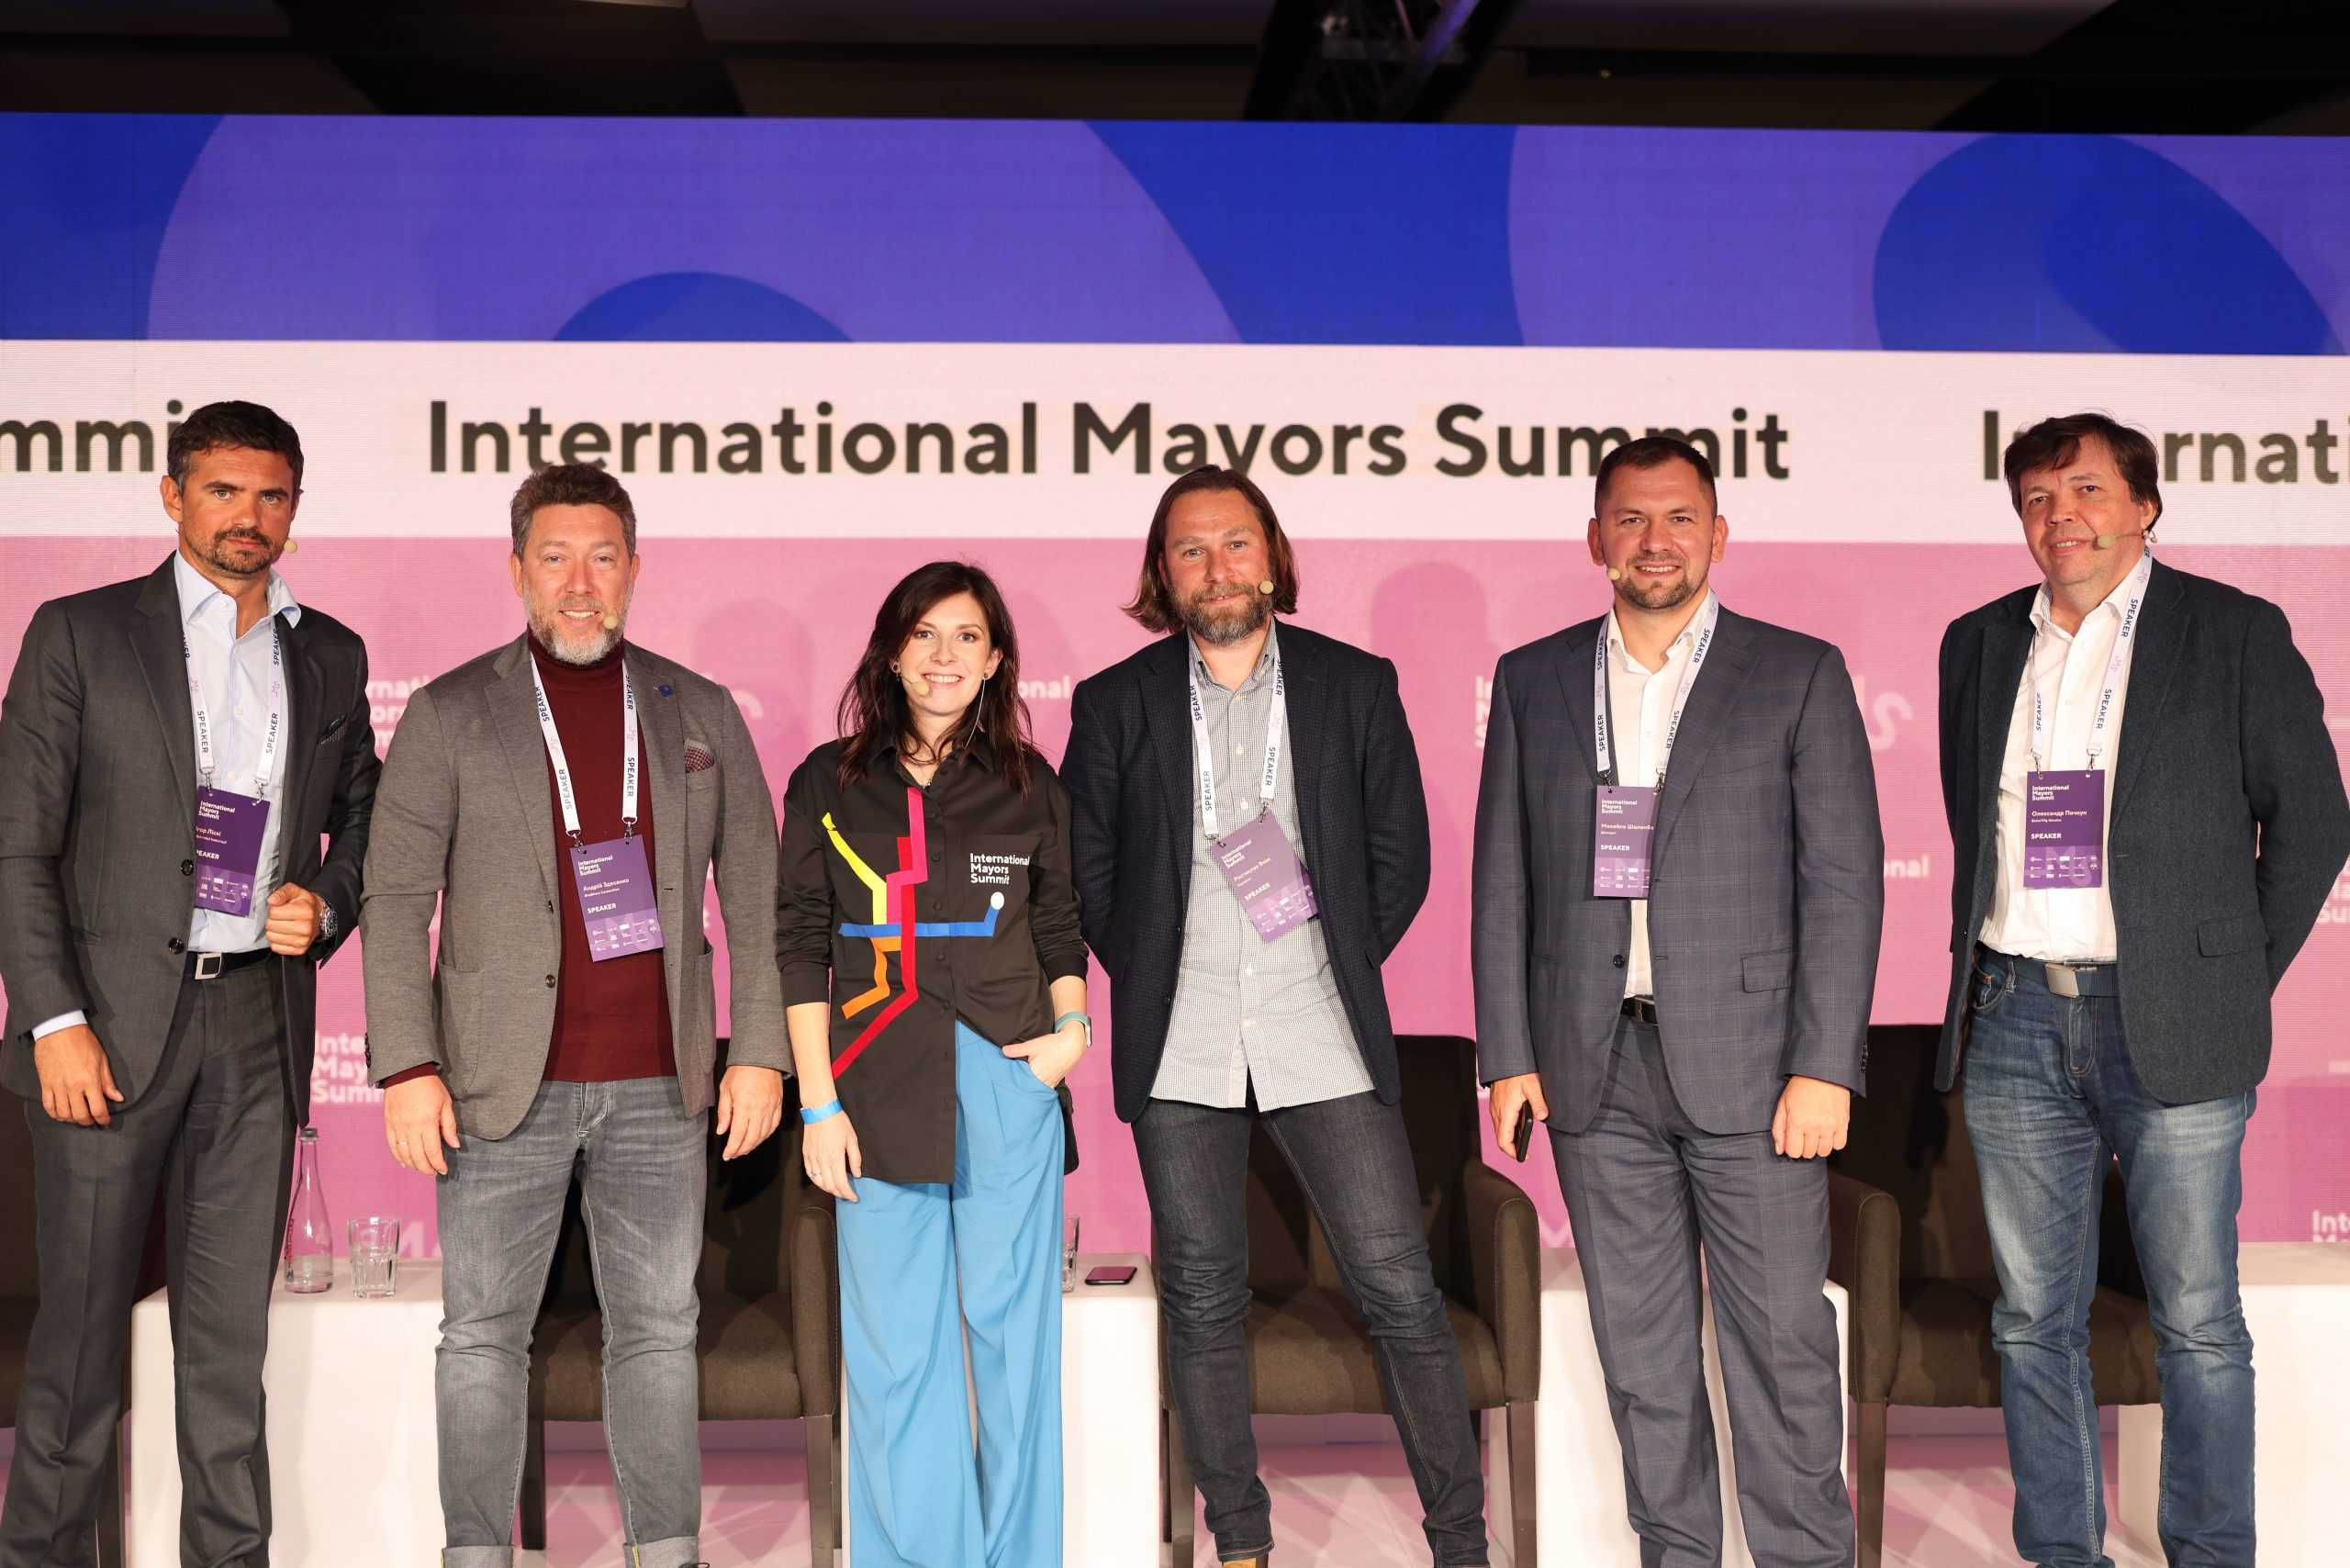 The 4th International Mayors Summit in Kyiv Brought Together More Than 50 Mayors